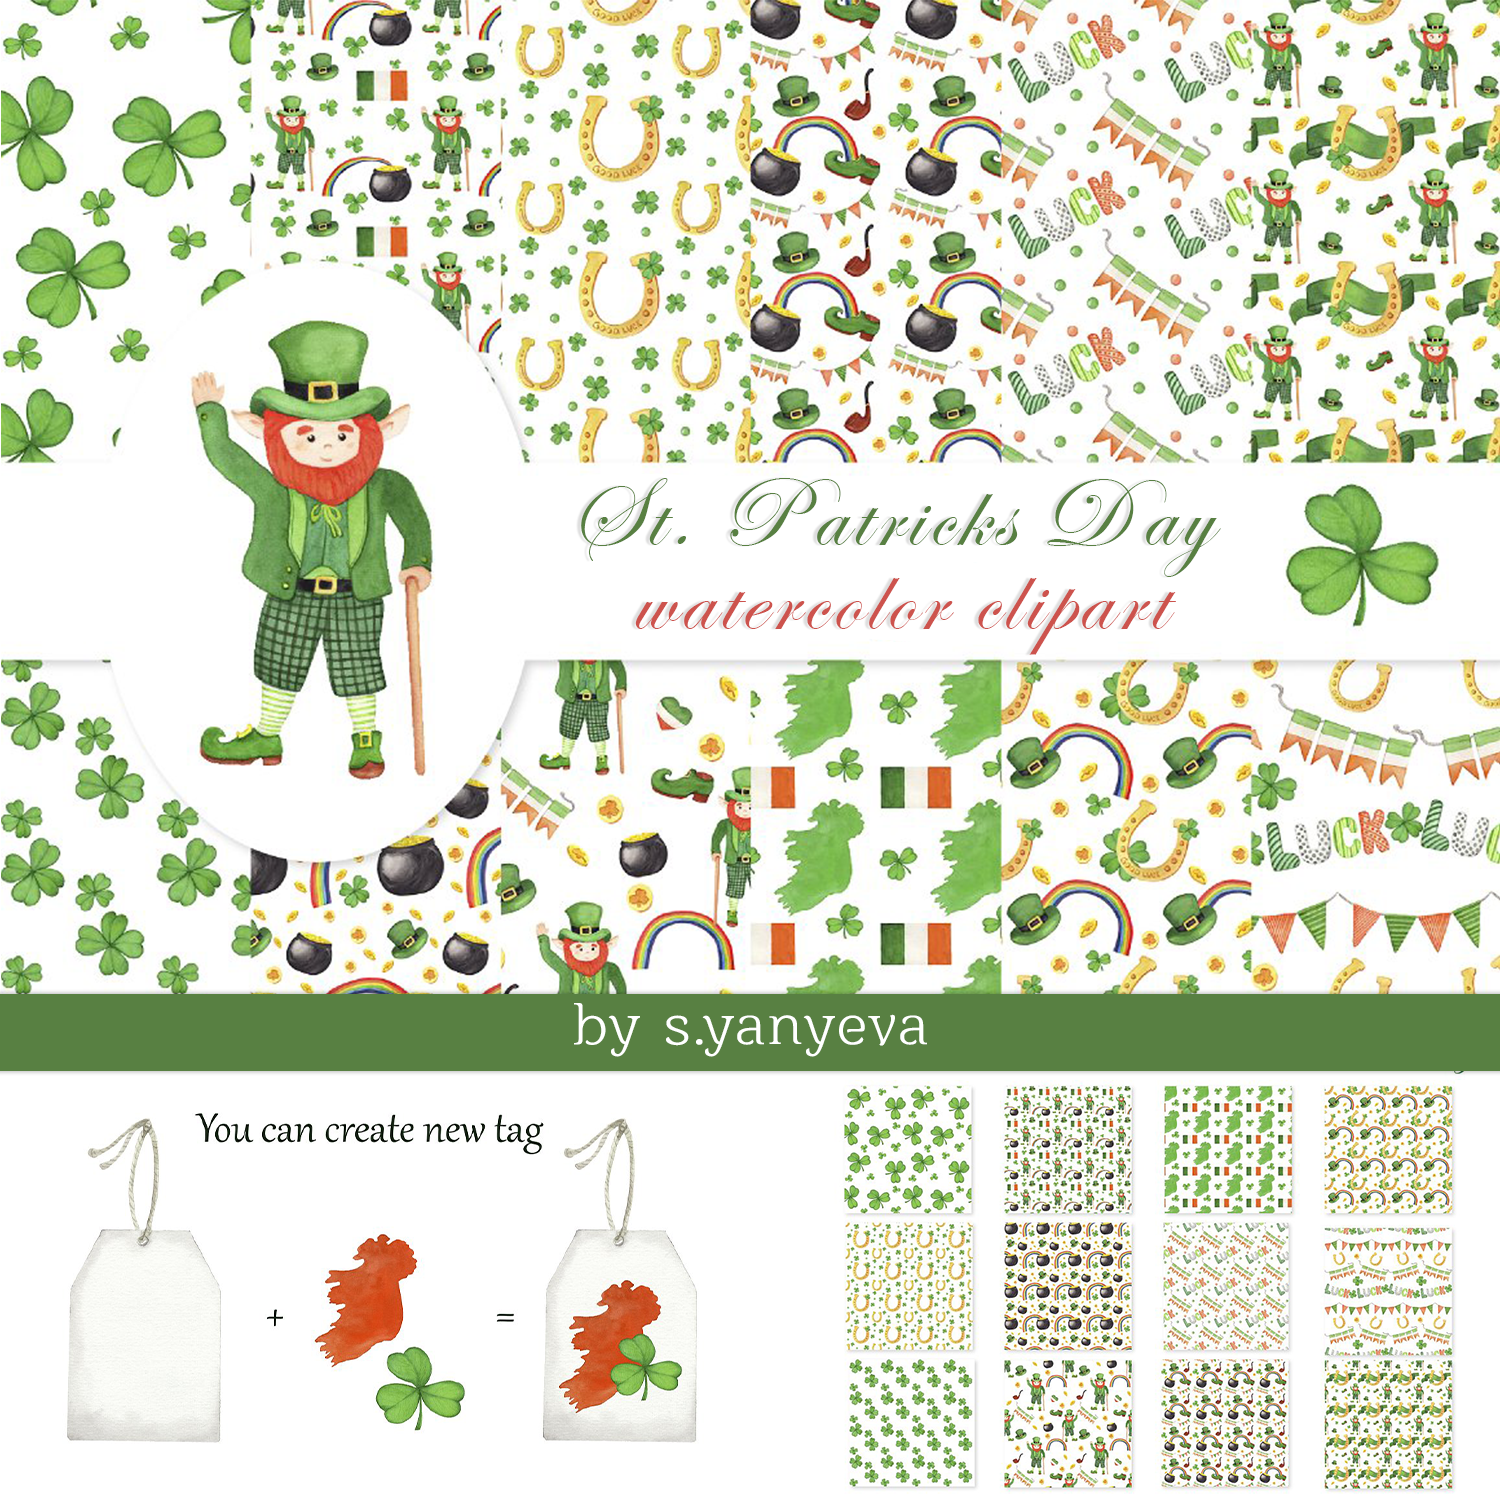 Prints of patricks day watercolor clipart.